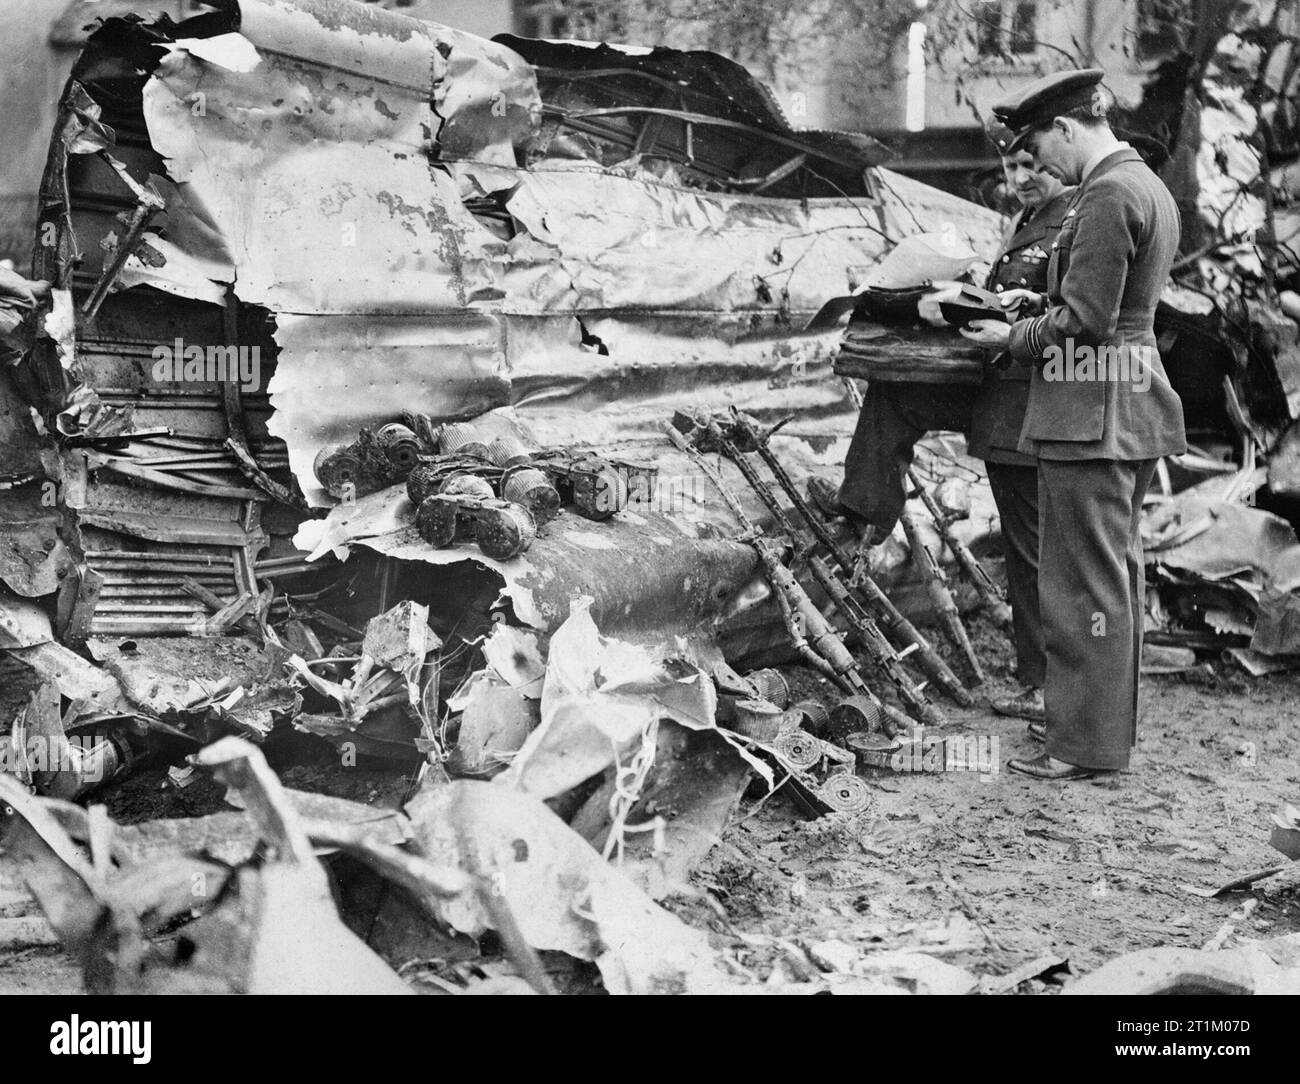 Luftwaffe Raids Over Britain Two senior RAF officers examining the wreckage of a Heinkel He 111 which crashed at Clacton, 1 May 1940. The bomber's defensive 7.92mm MG 17 machine guns and ammunition drums have been collected together. Stock Photo